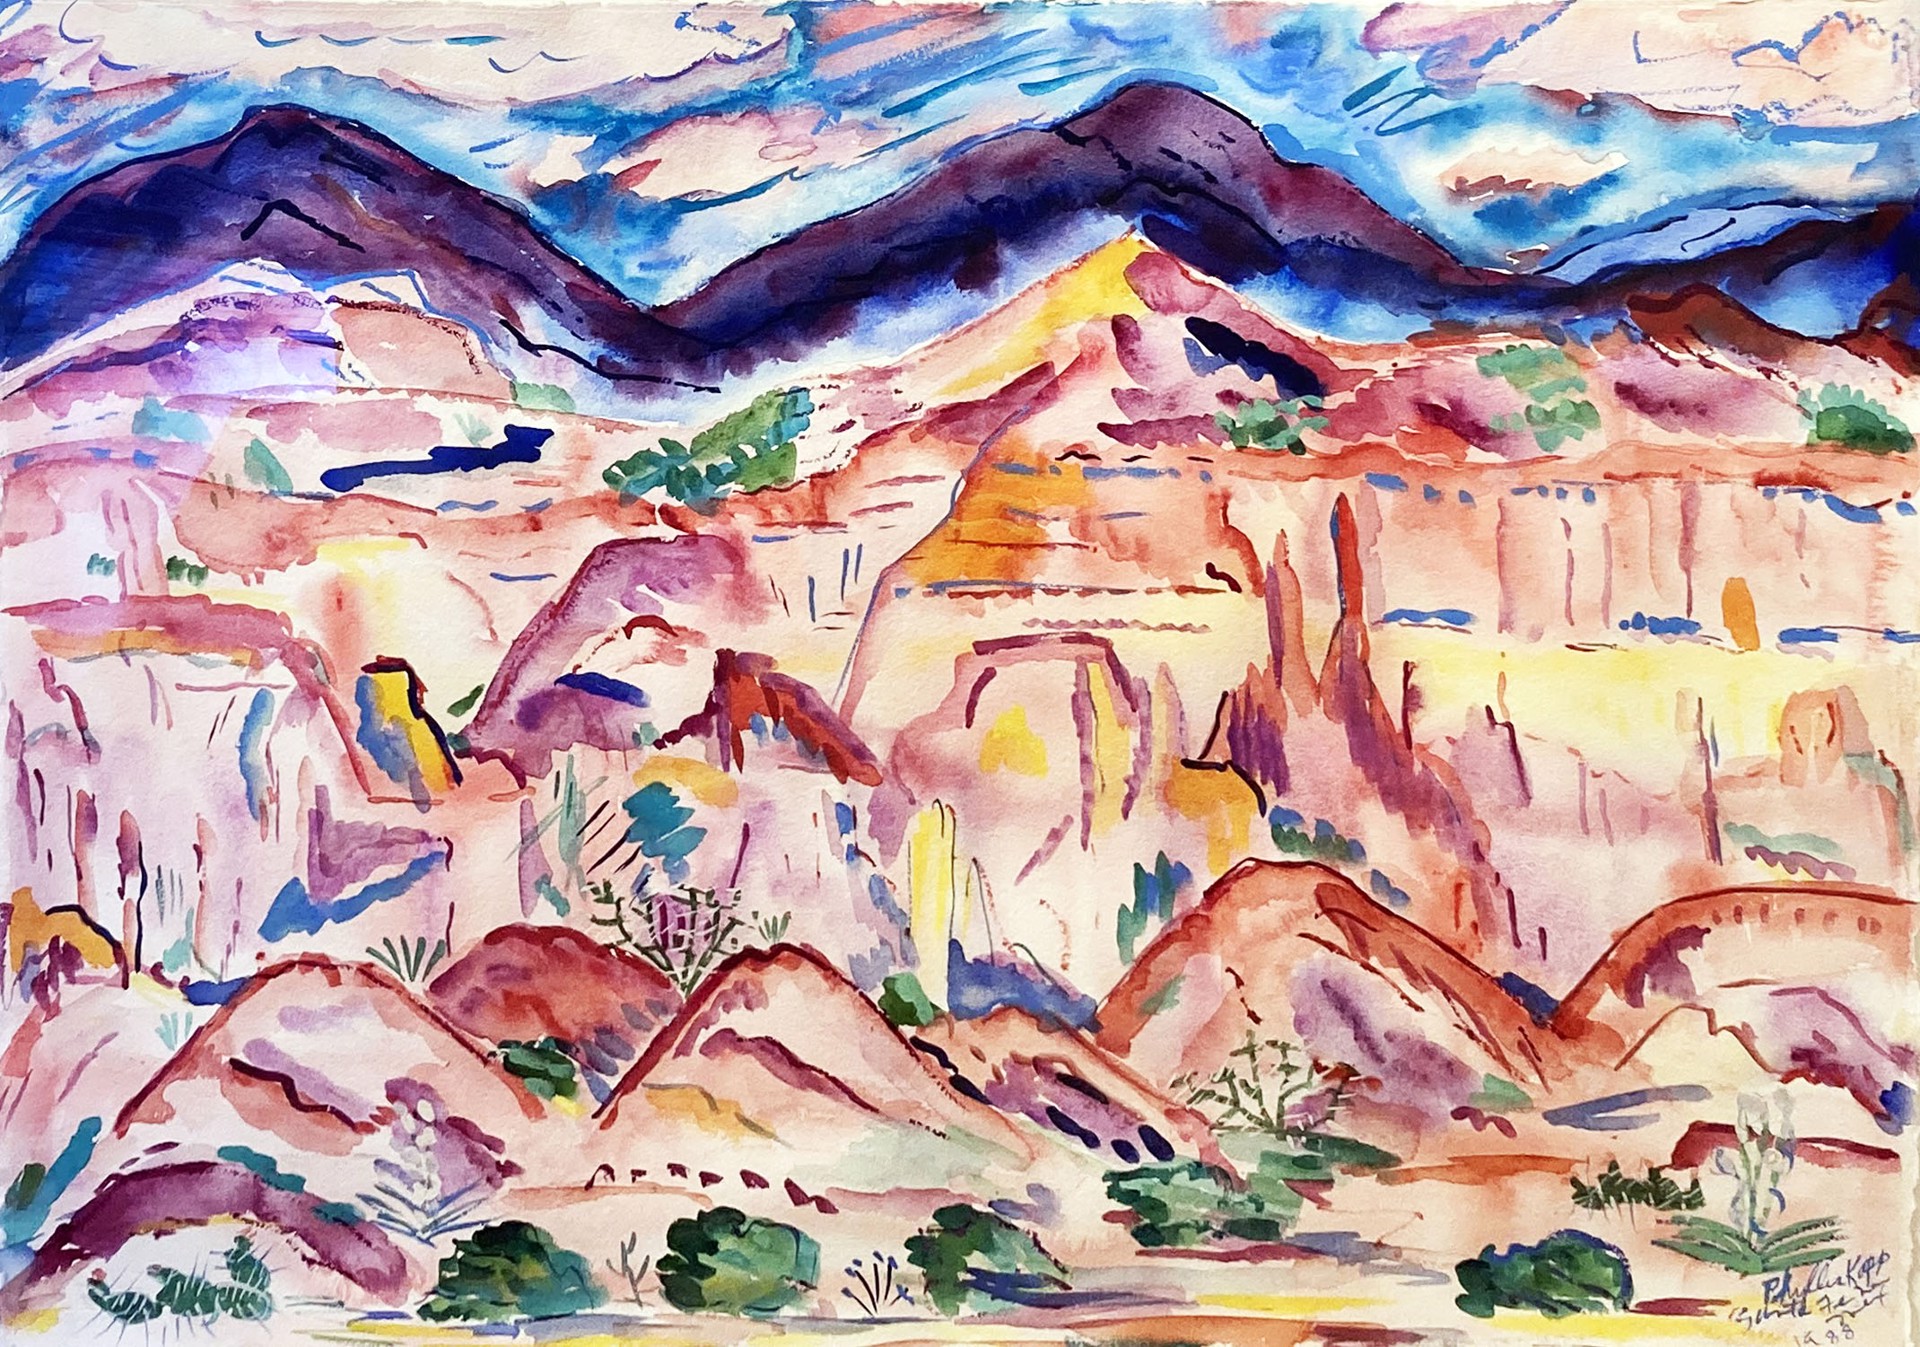 The Song of the Canyon by Phyllis Kapp